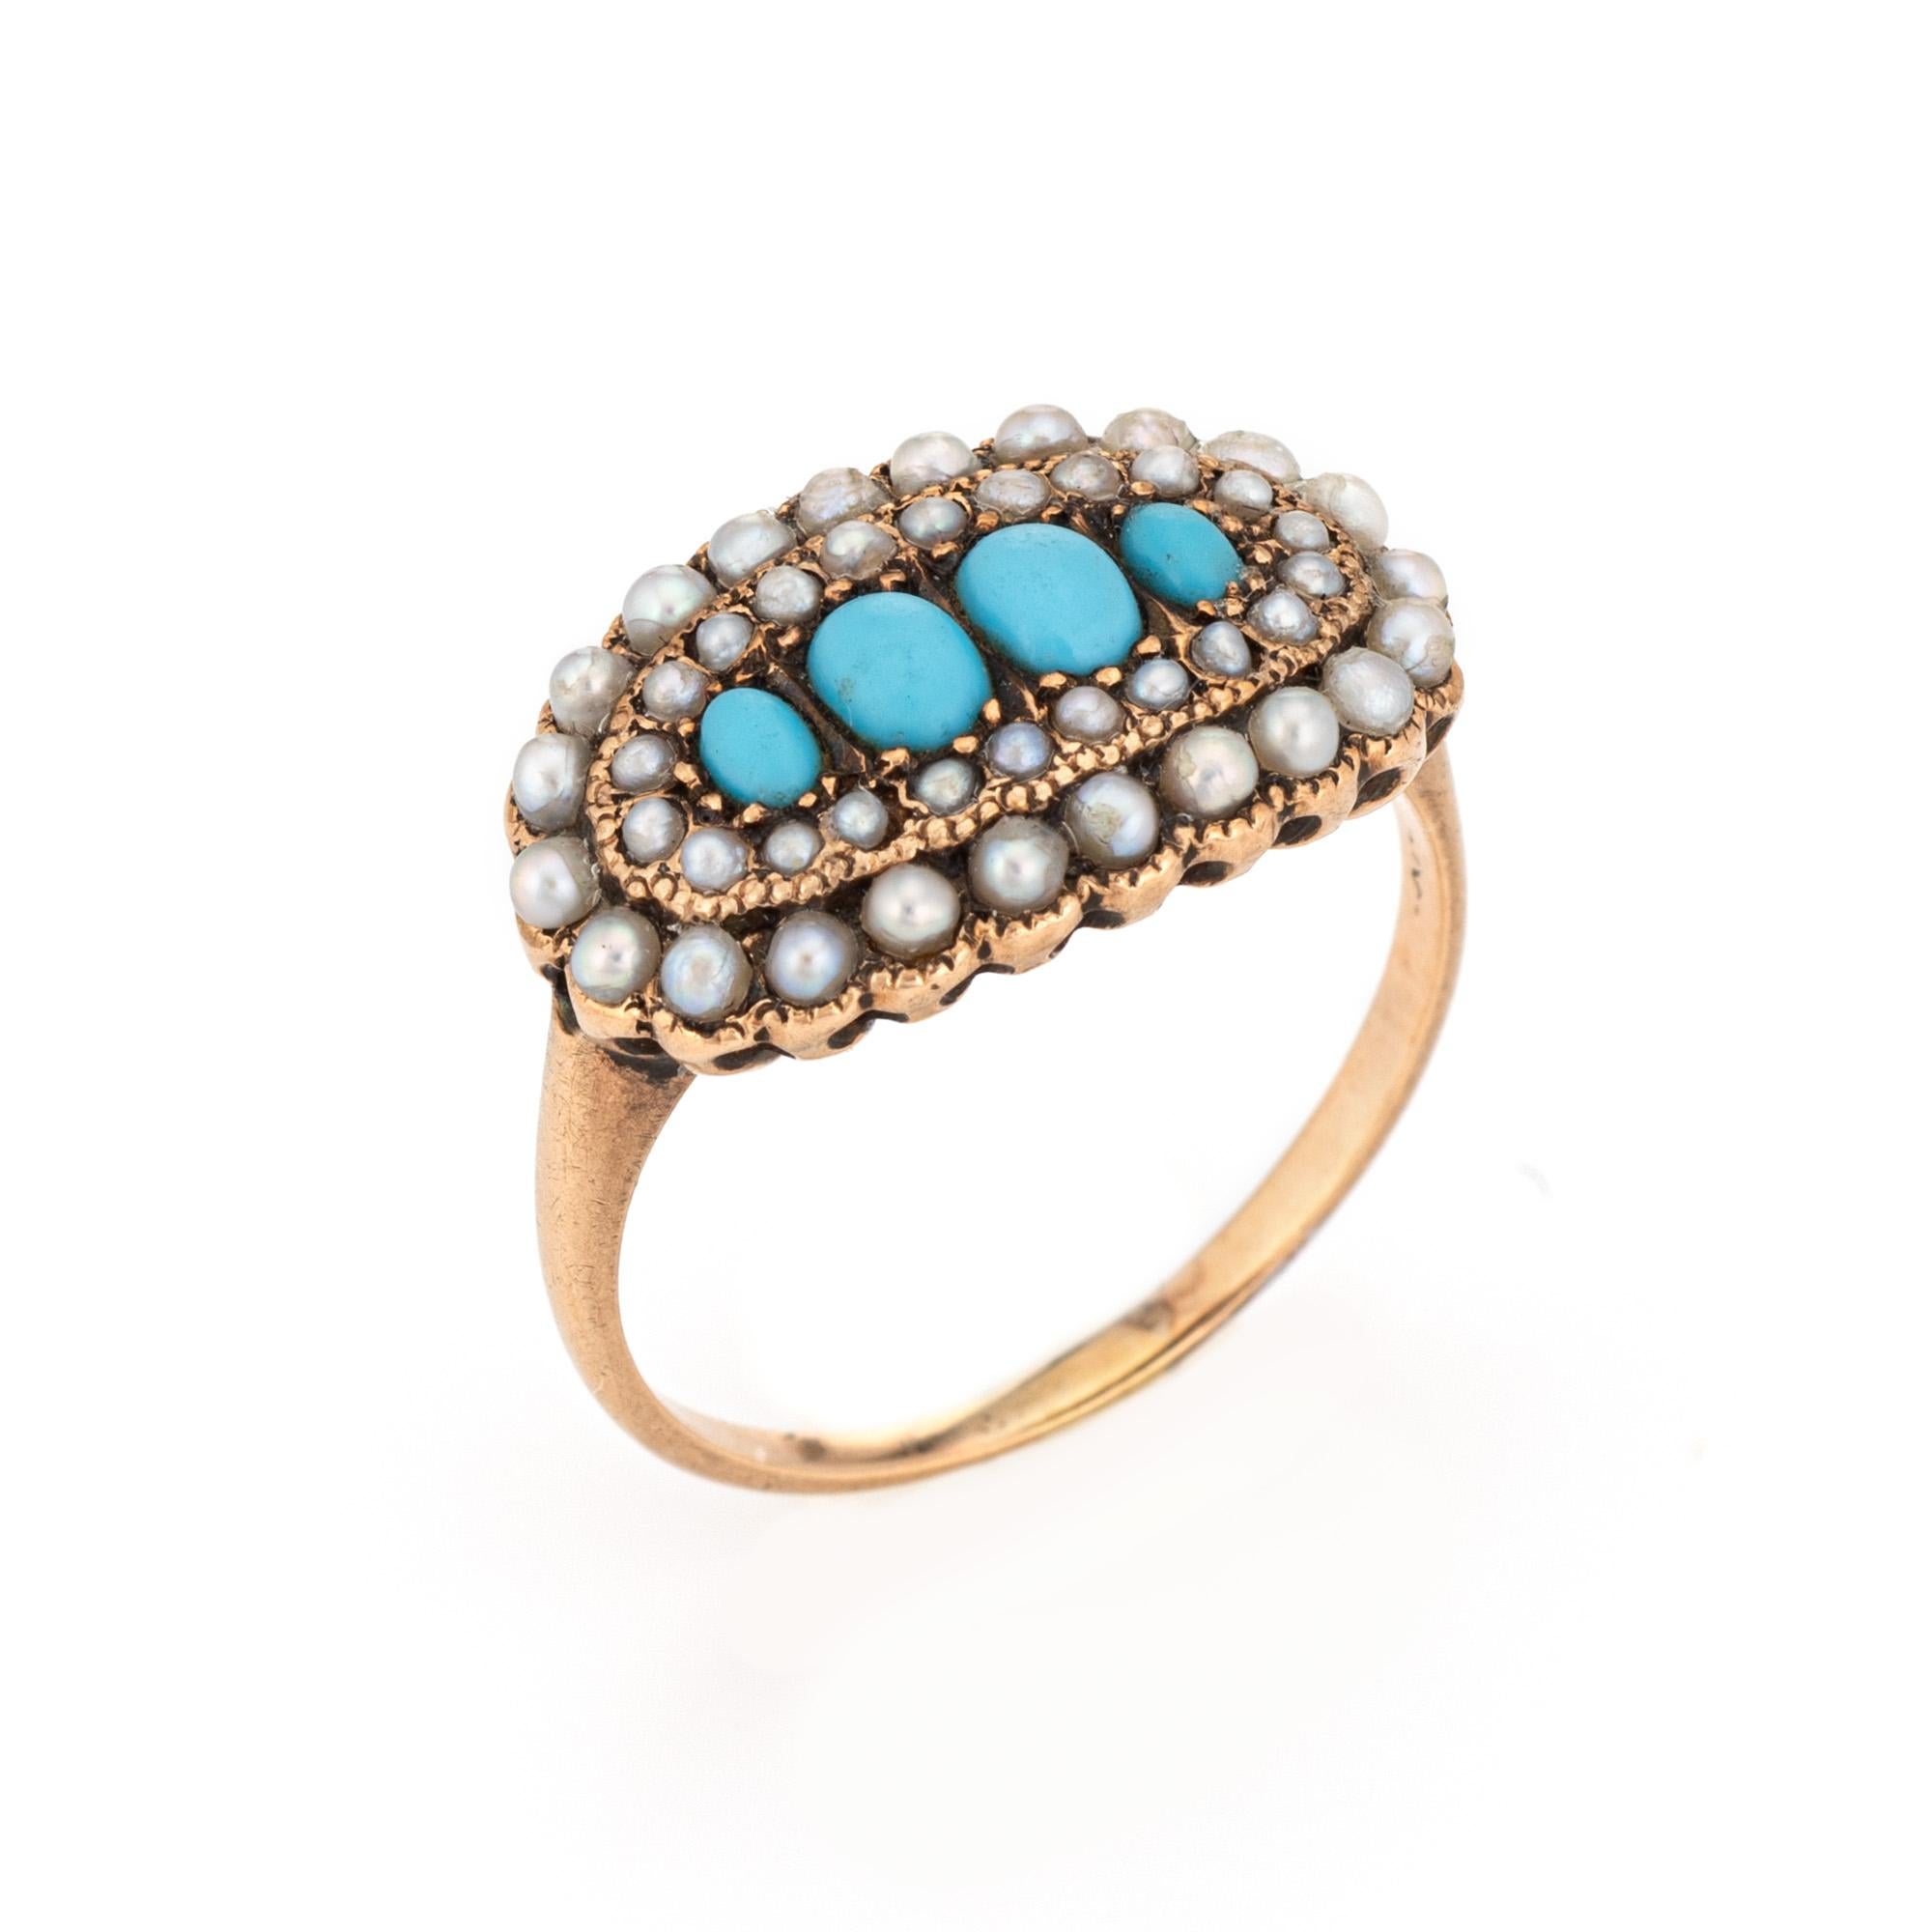 Elegant antique Victorian turquoise & seed pearl ring (circa 1880s to 1900s), crafted in 10 karat yellow gold. 

Turquoise cabochons range in size from 2.5mm to 4mm, accented with 1mm to 1.5mm seed pearls.

The east-west facing ring features egg